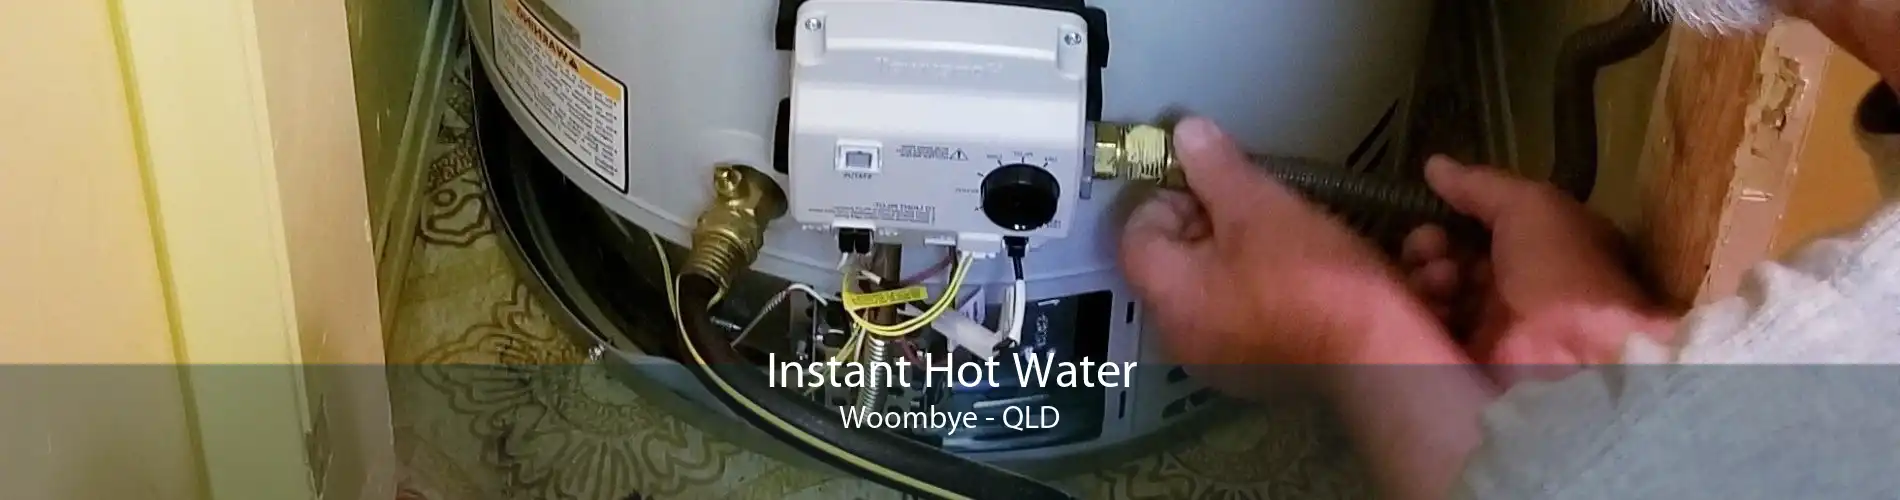 Instant Hot Water Woombye - QLD